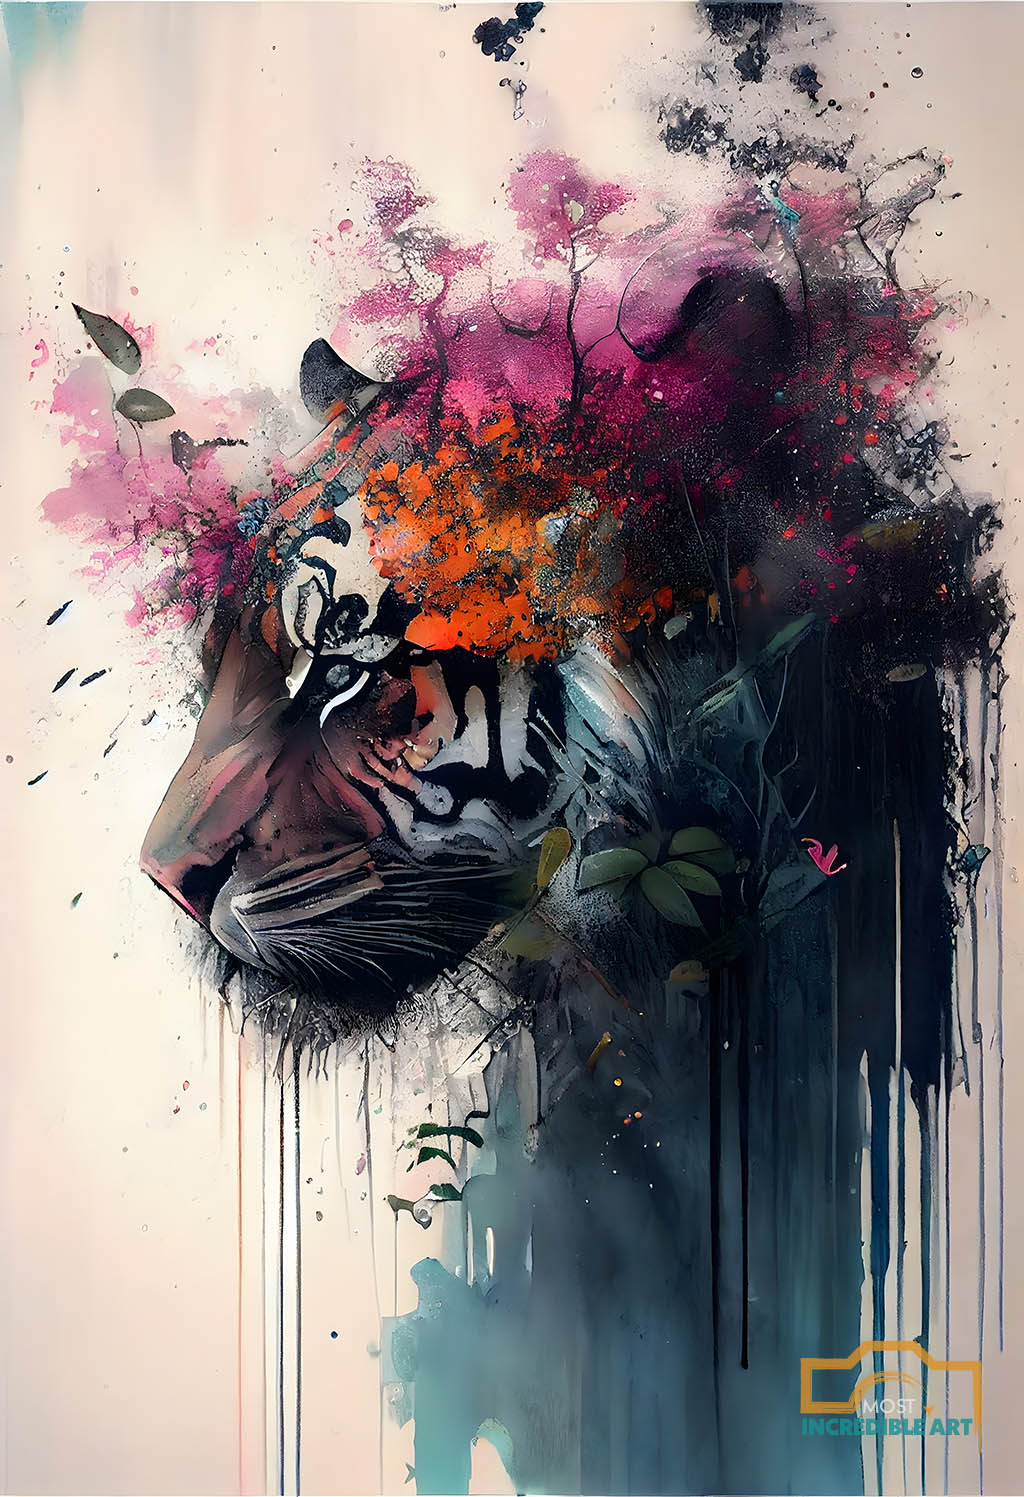 Colorful Majesty: Abstract Tiger Art Watercolor w/Vibrant Flowers (Digital Download)